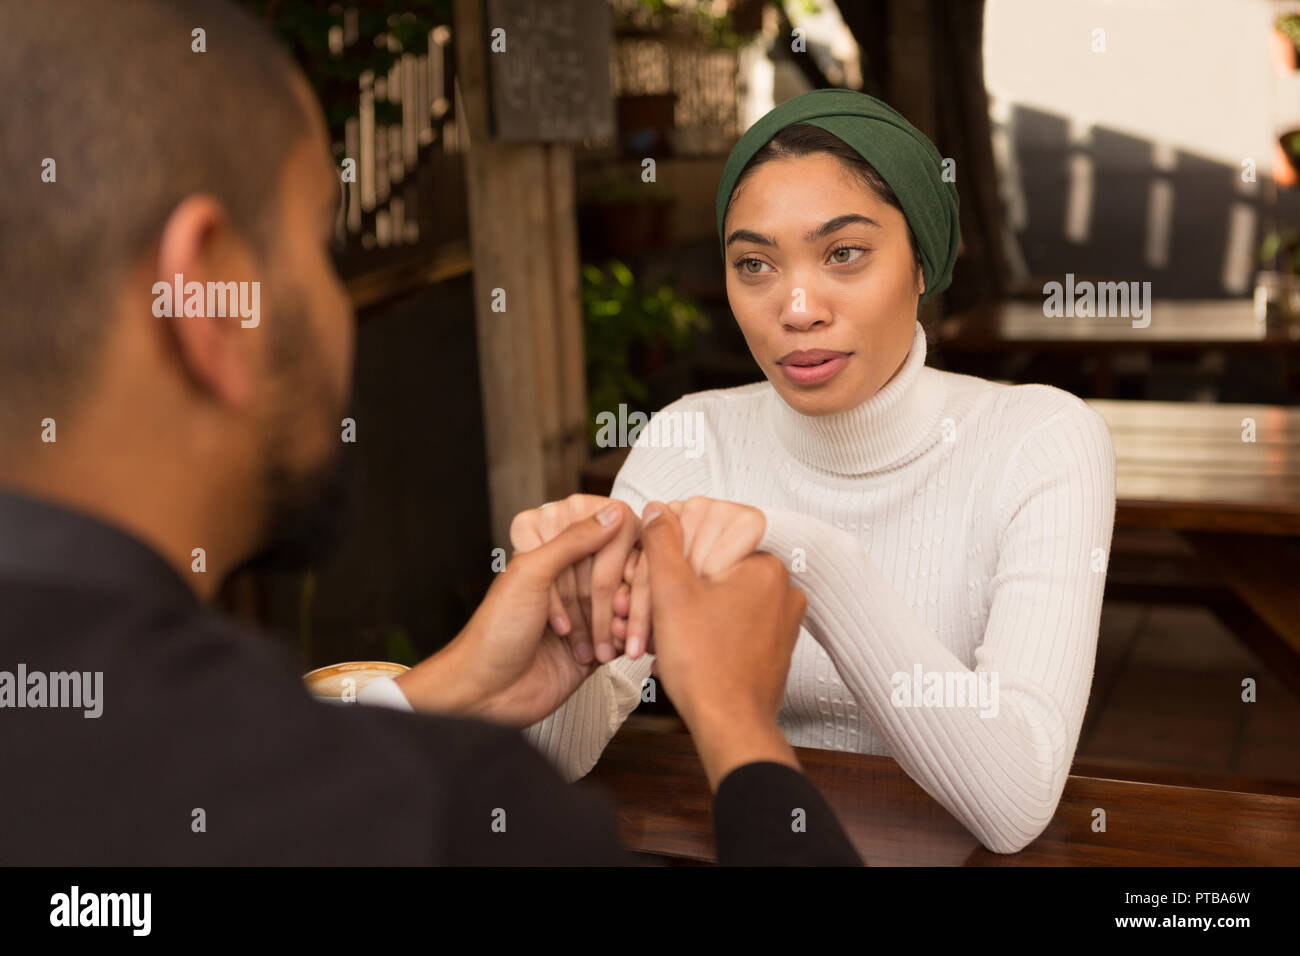 Couple holding hand in cafe Stock Photo